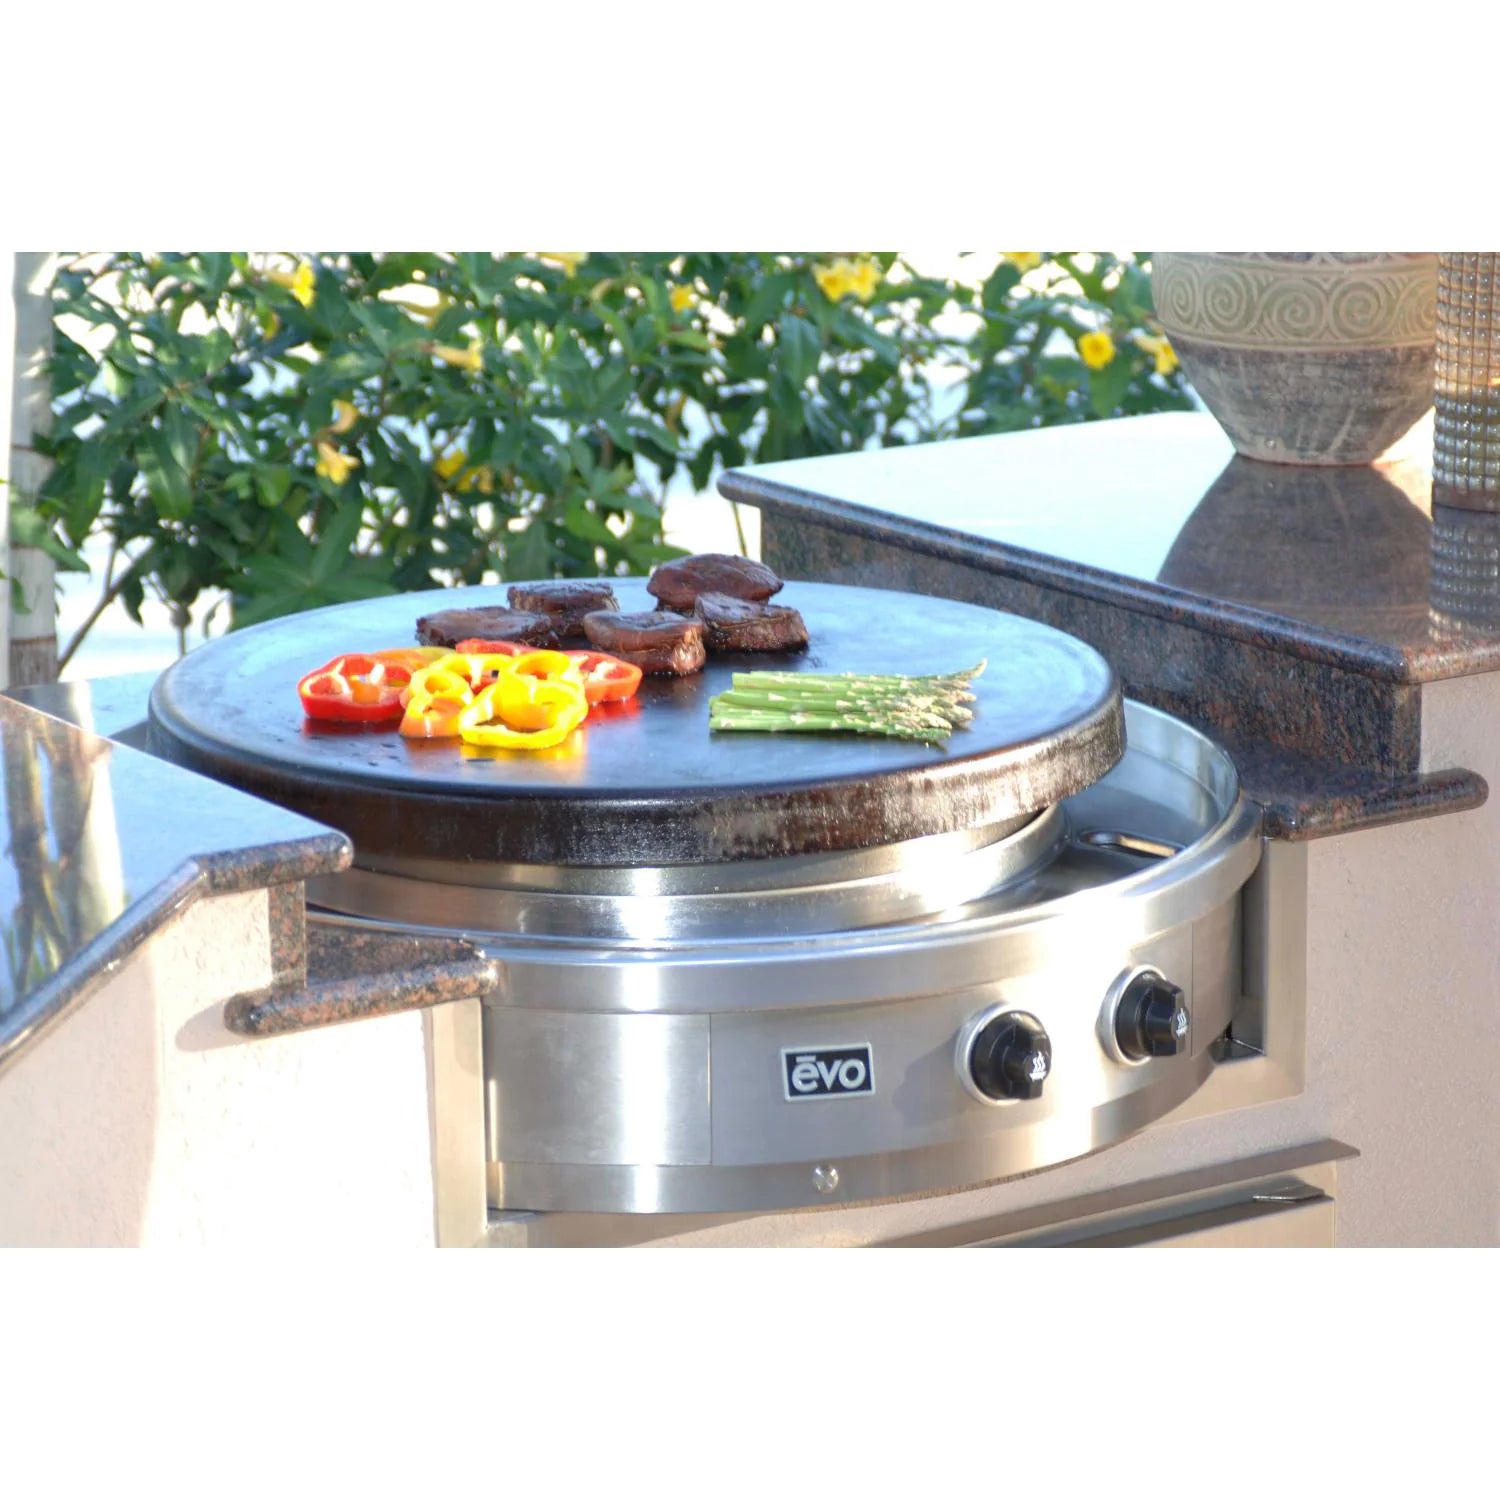 Coyote 30 inch Built-in Flat Top GAS Grill, Propane